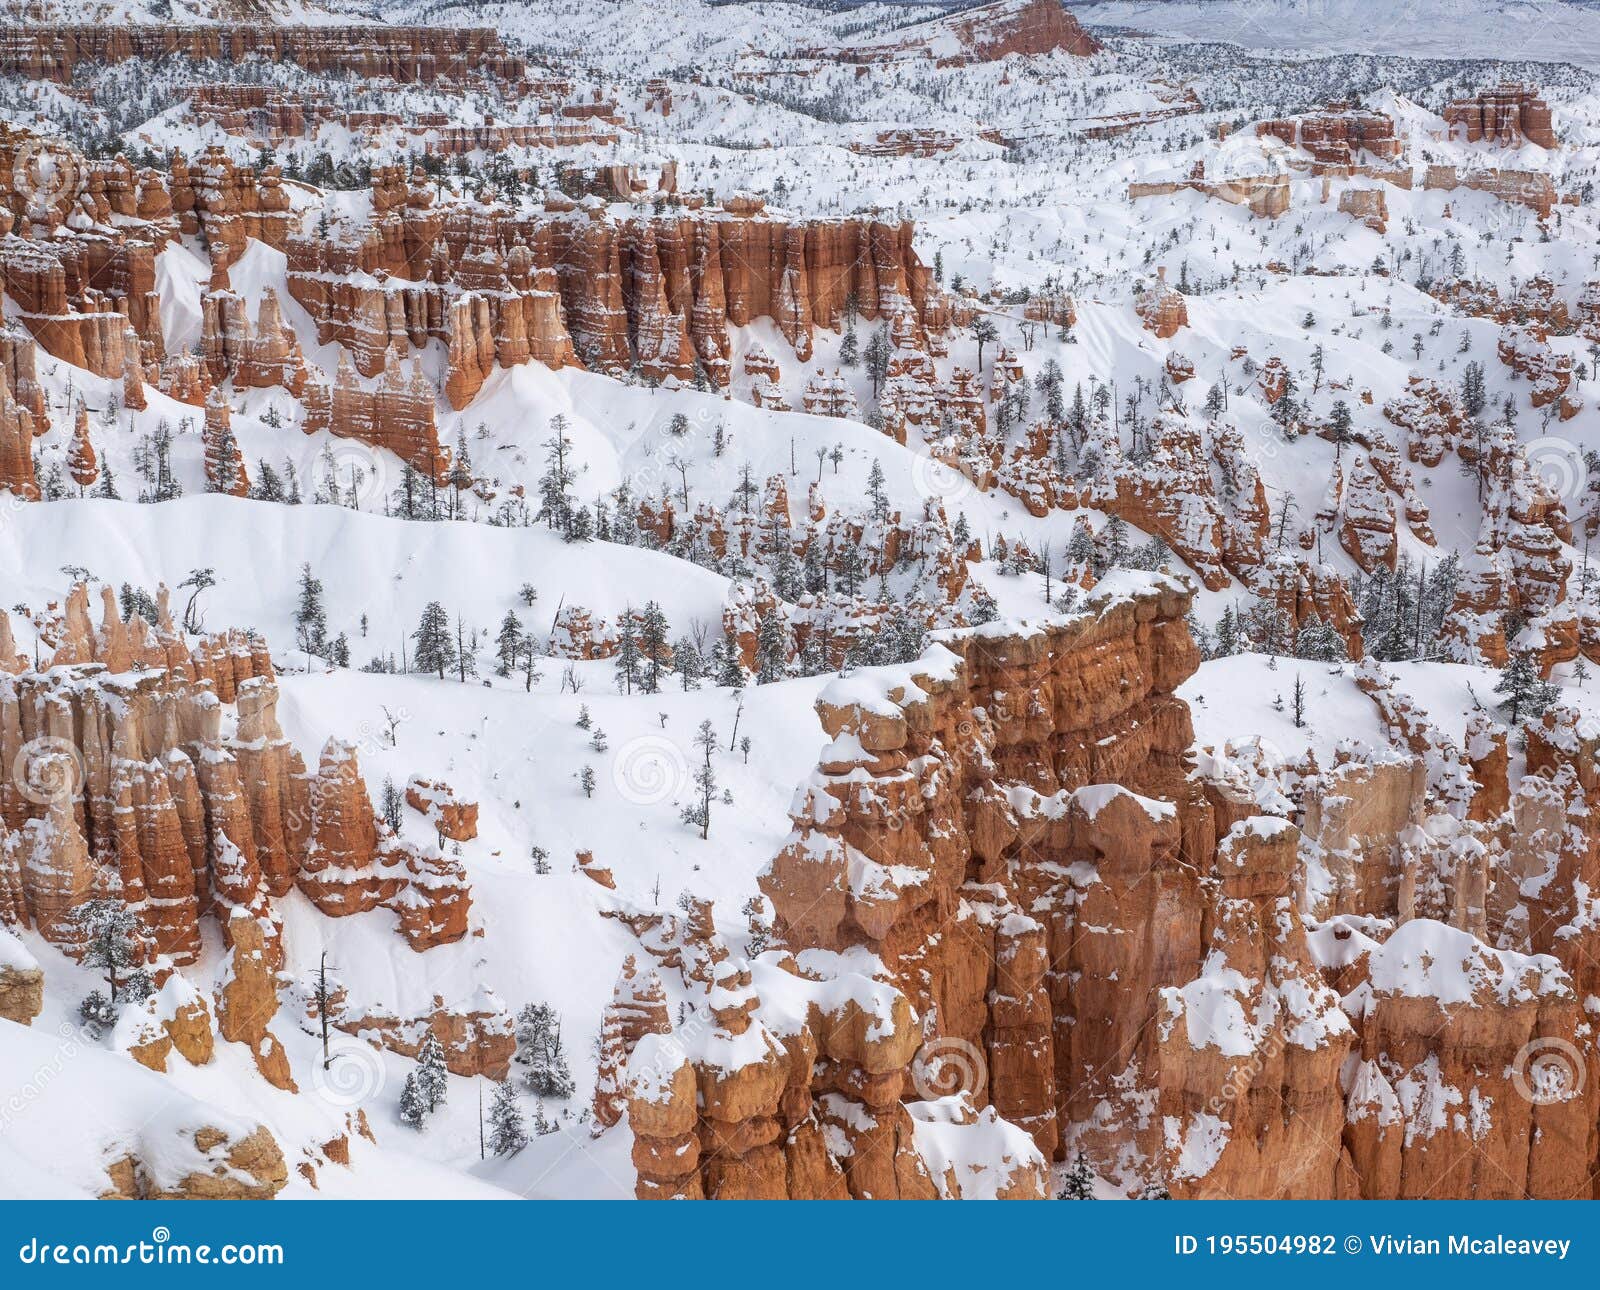 snow in brice canyon